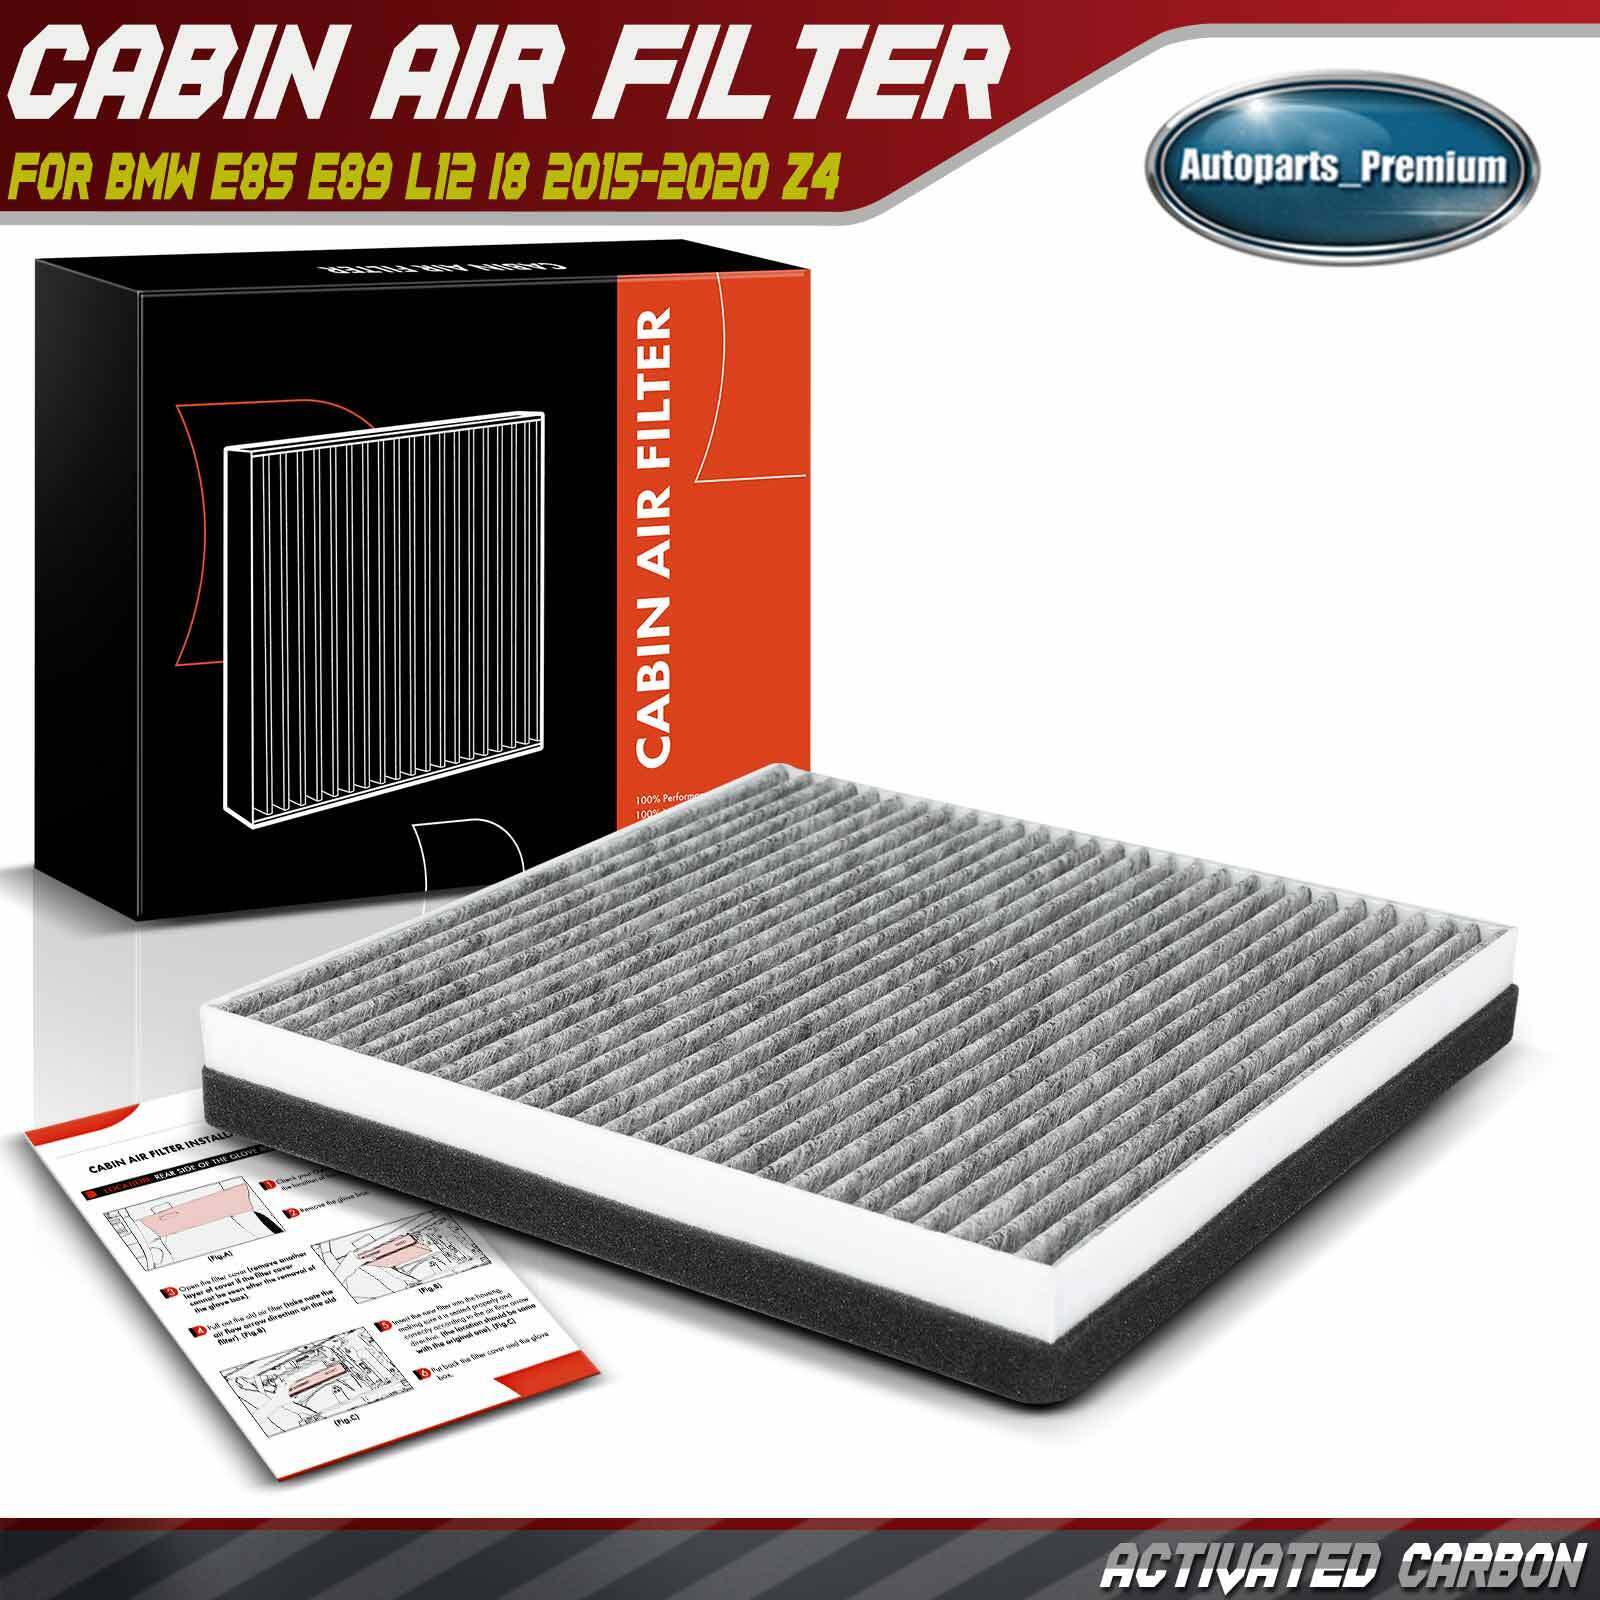 Activated Carbon Cabin Air Filter for BMW E85 E89 L12 i8 2015-2020 Z4 2003-2016